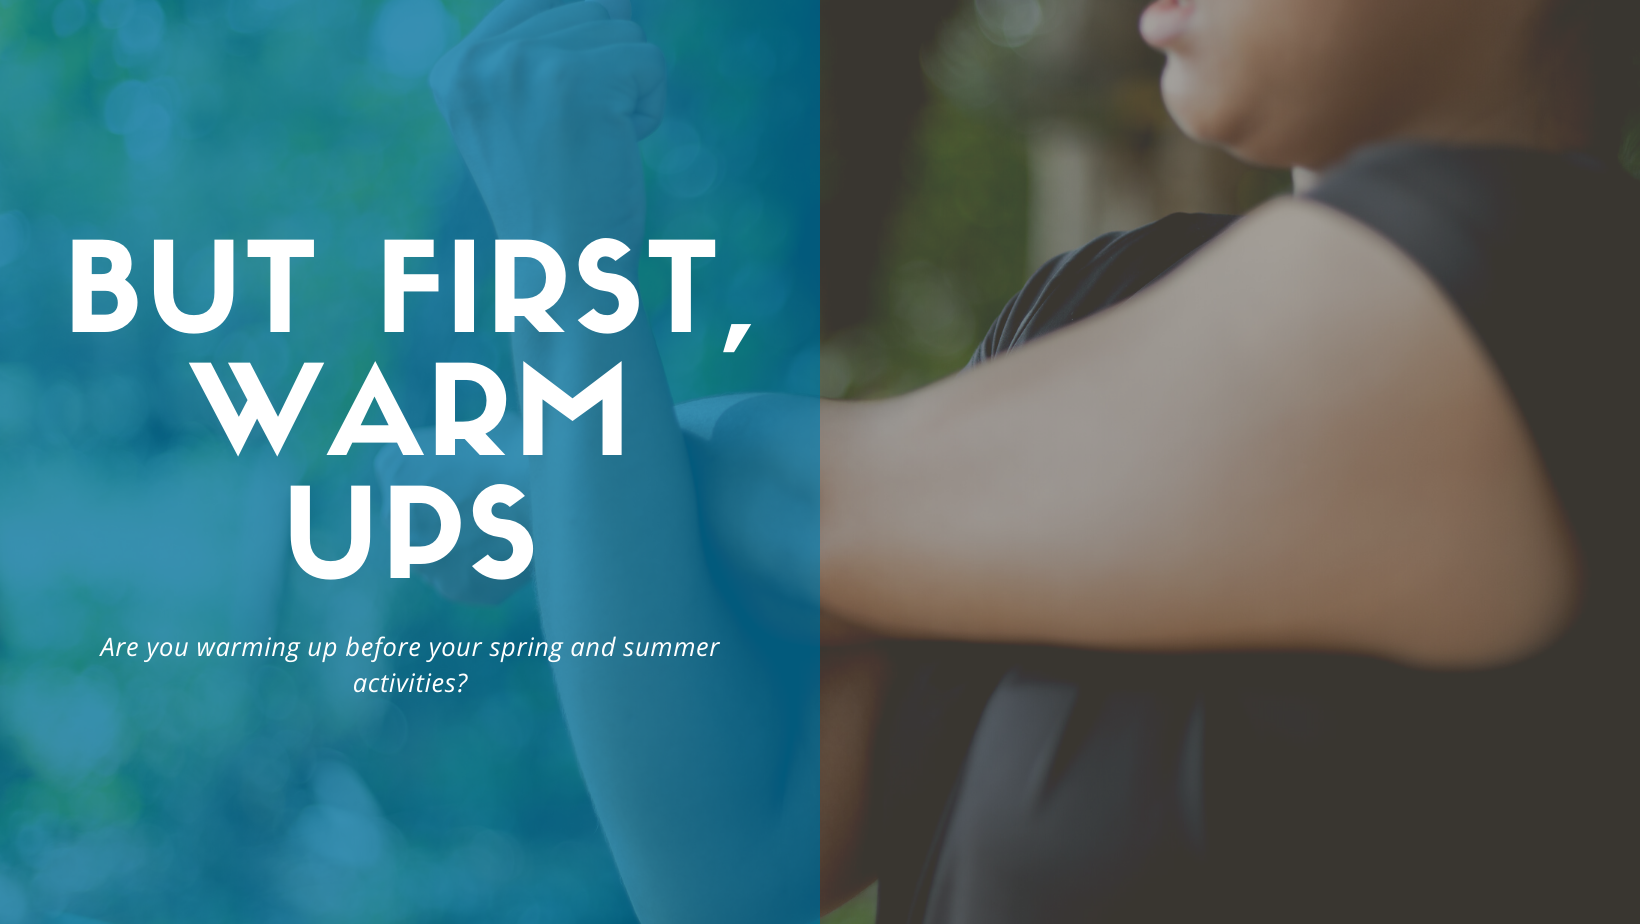 woman stretches arm with blog title "but first, warm ups" on right side of image